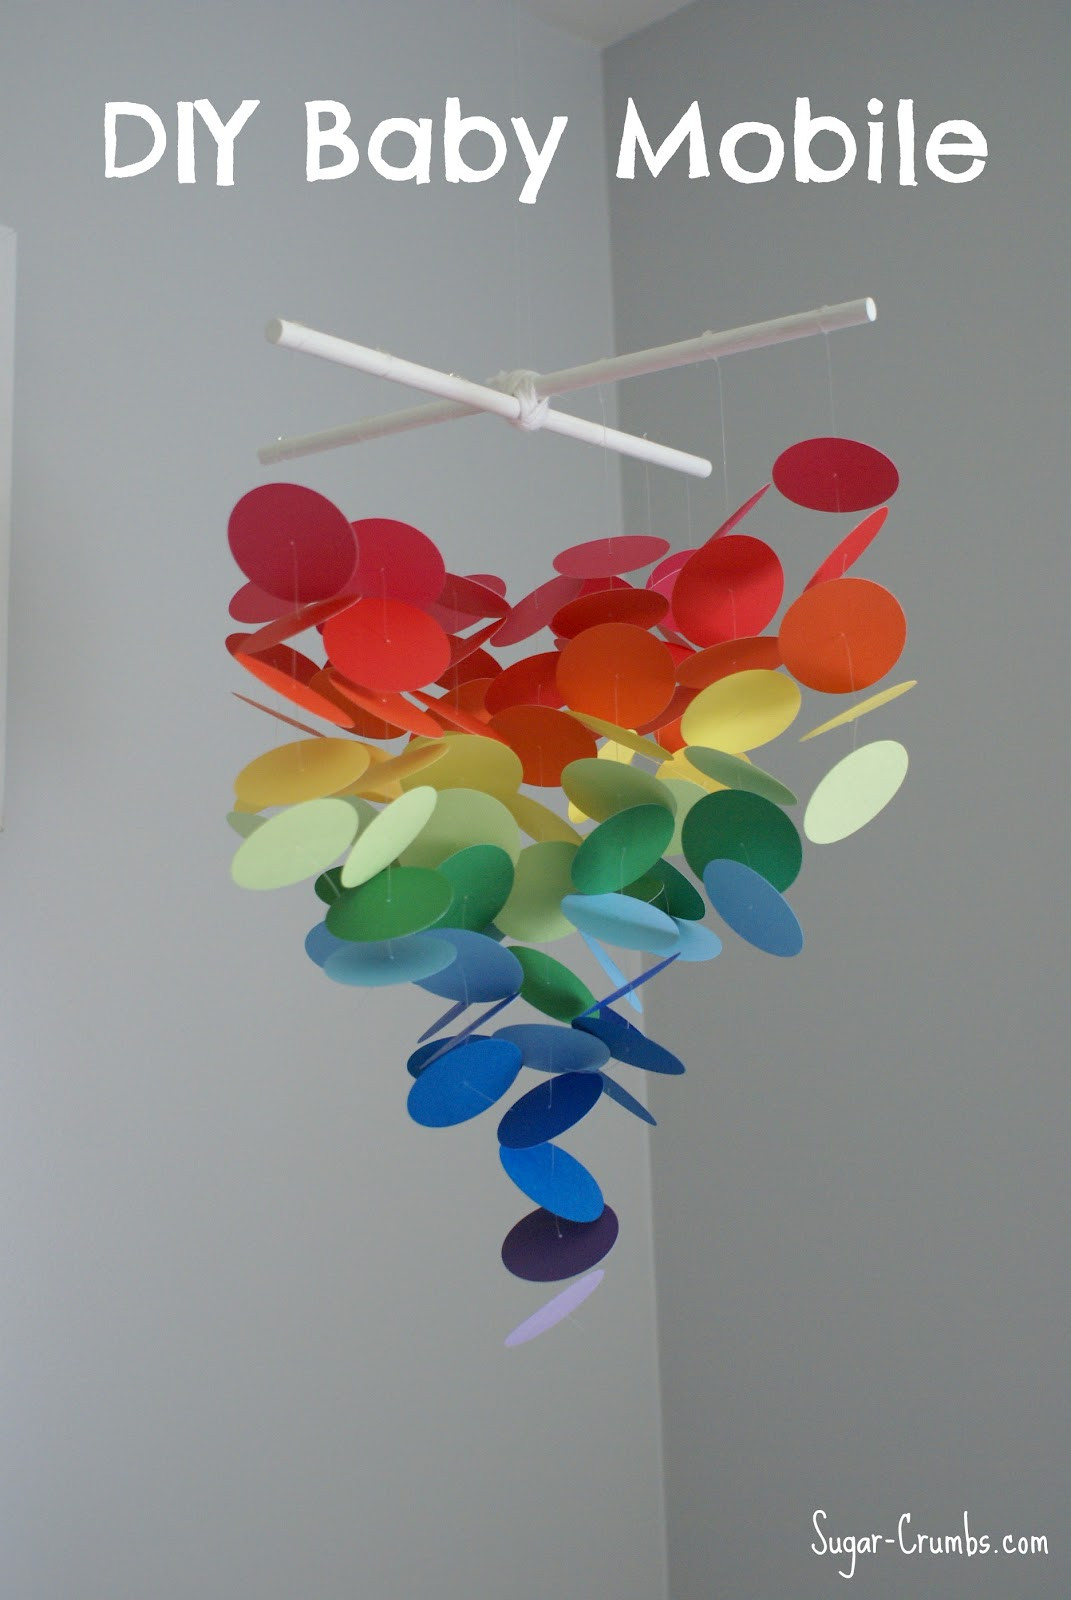 Best ideas about DIY Baby Mobile
. Save or Pin Sugar Crumbs DIY Baby Mobile Now.